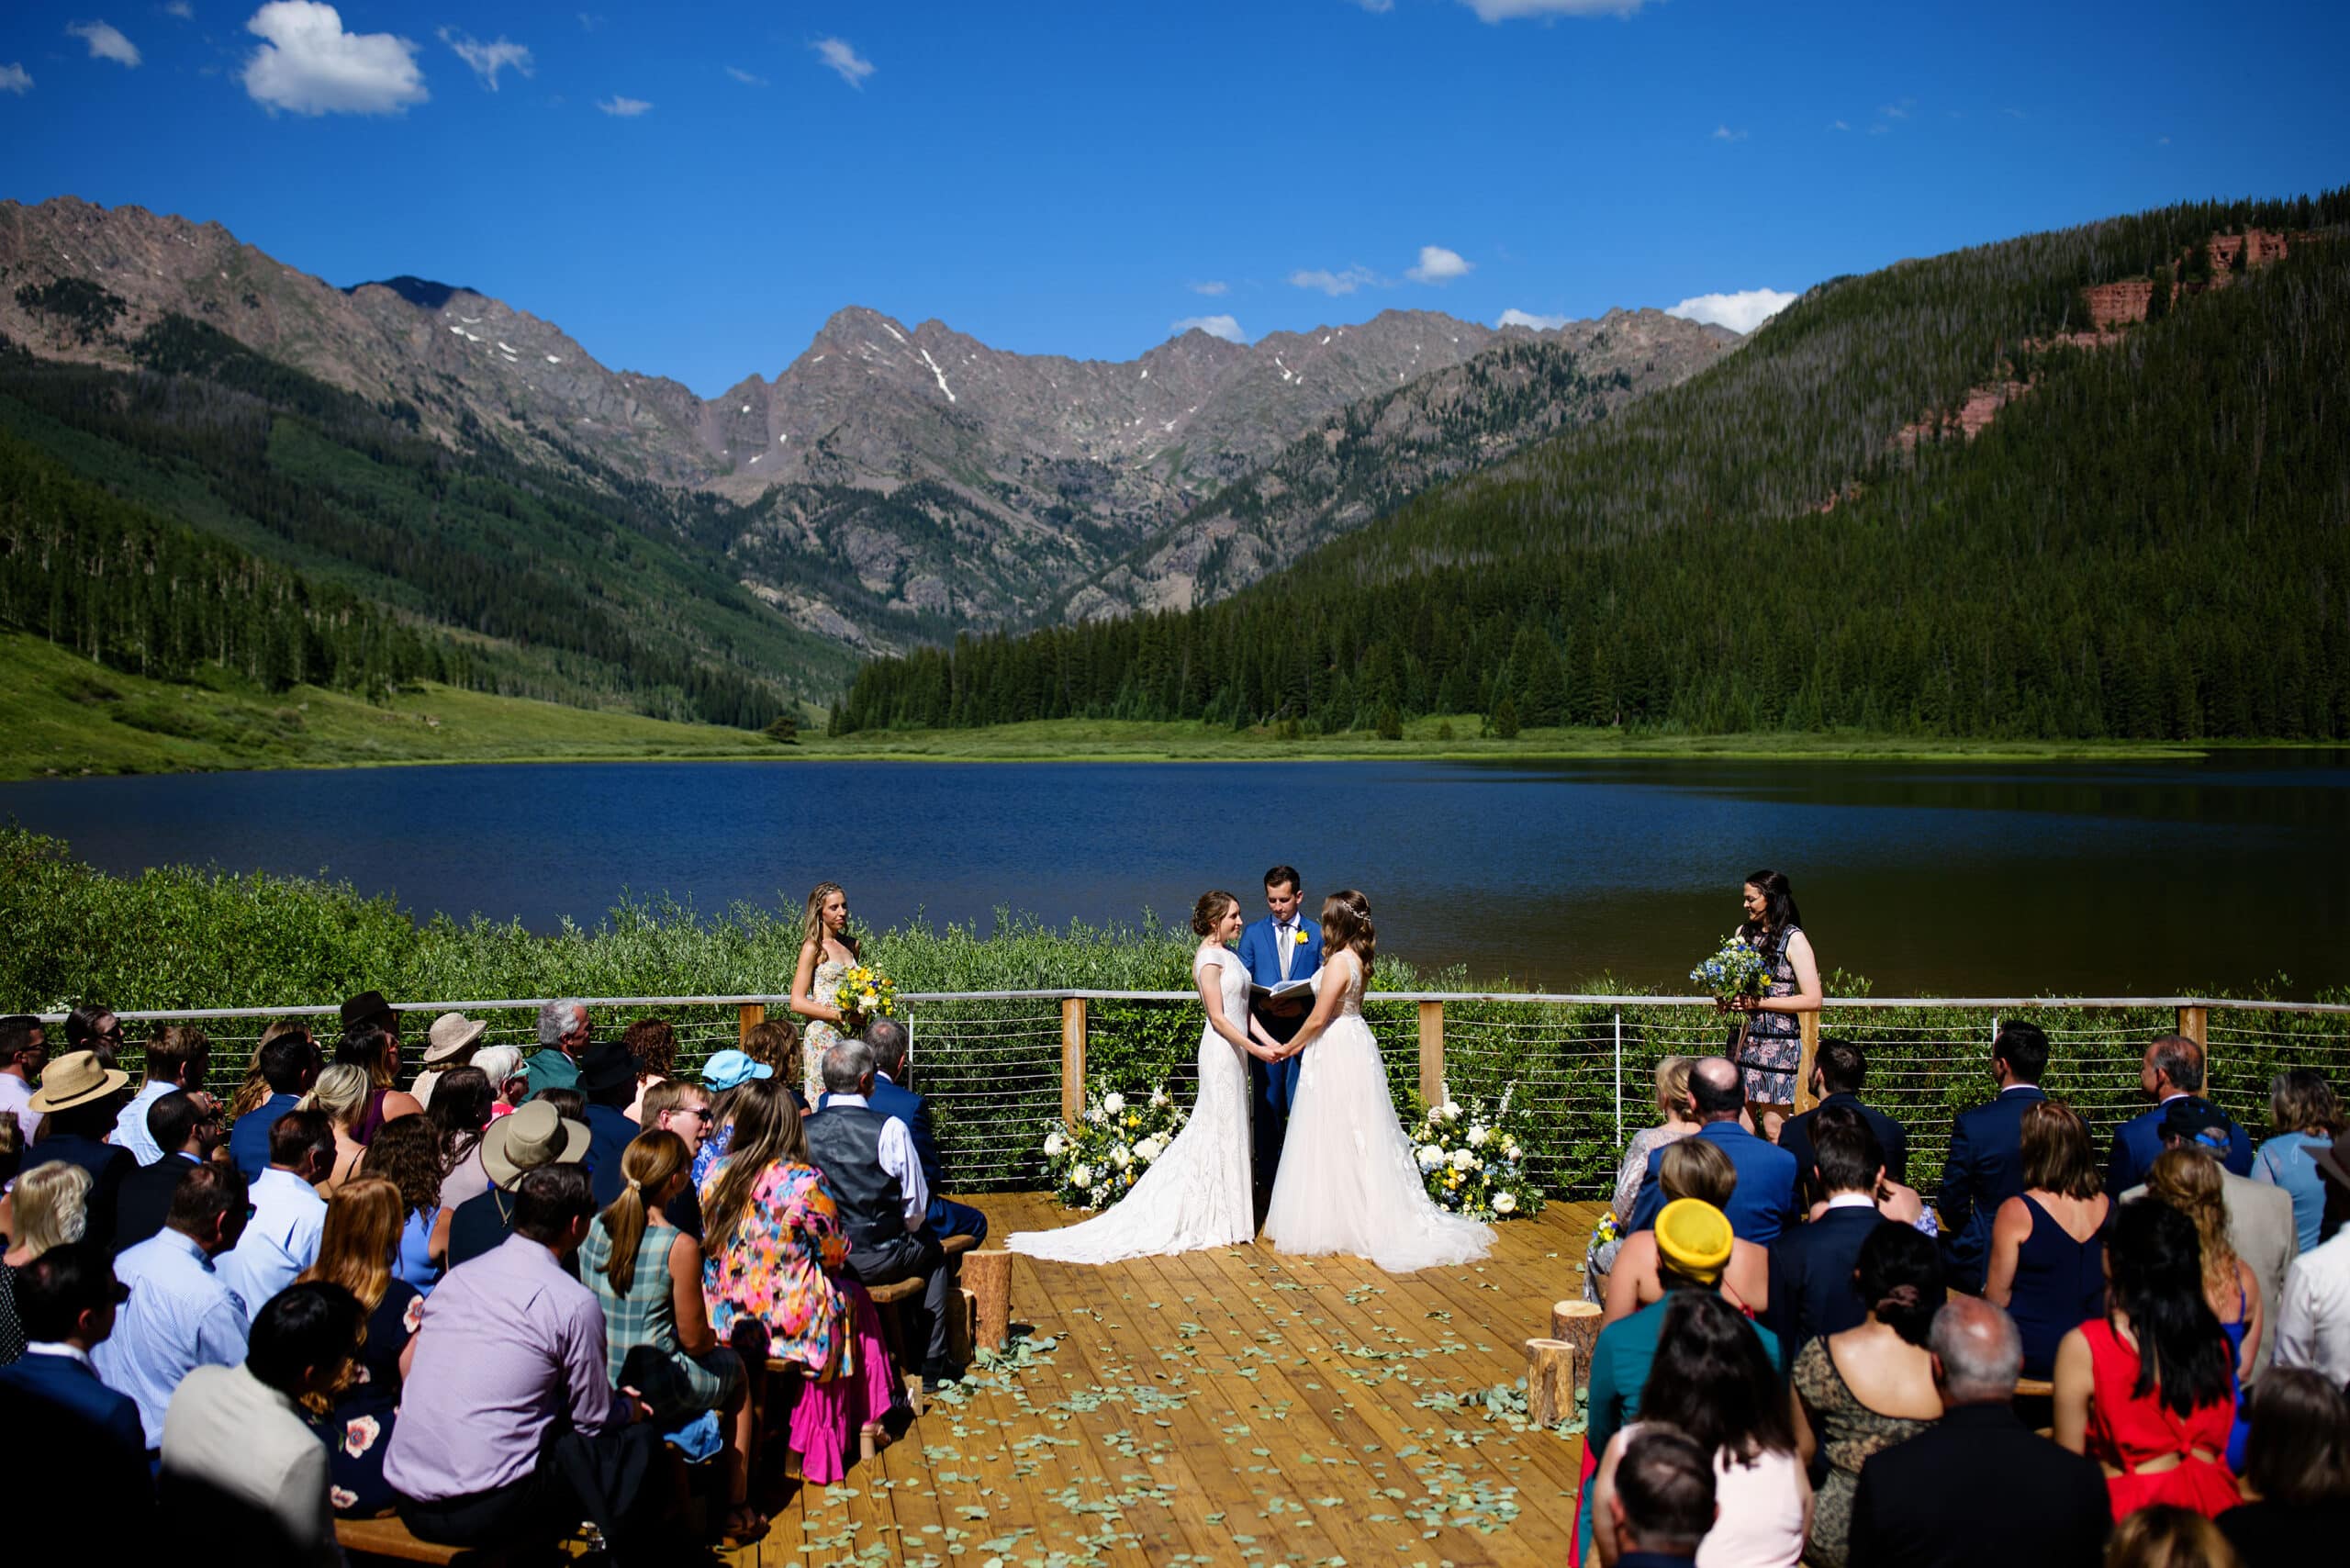 The two brides hold hands during their wedding ceremony on the deck at Piney River Ranch